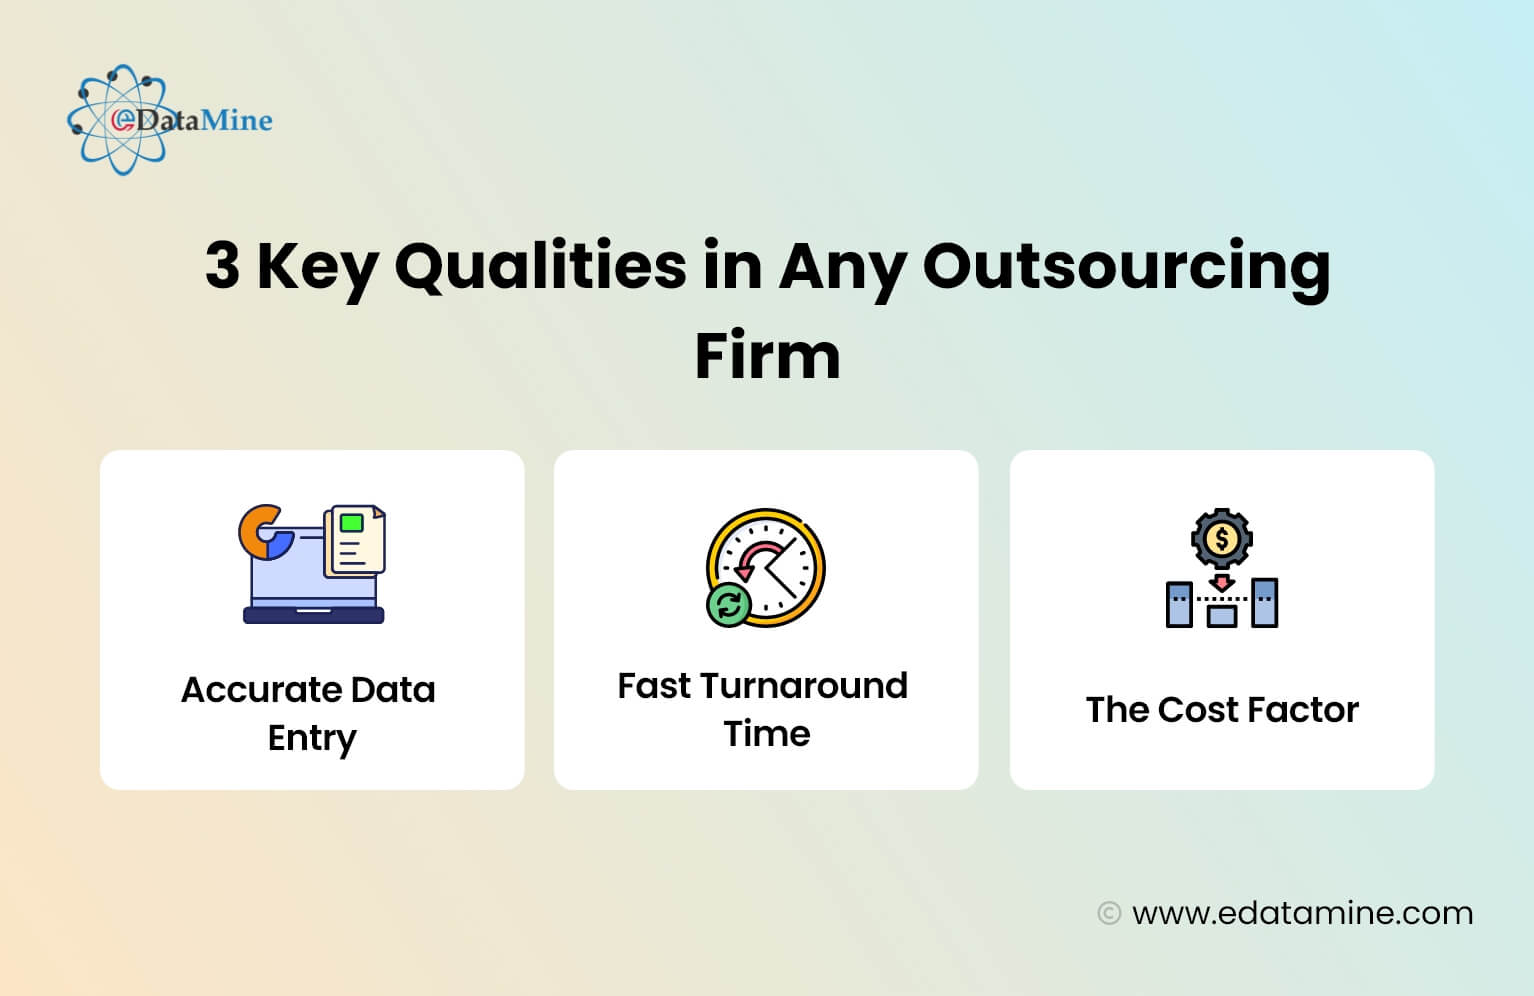 3 Key Qualities in Any Outsourcing Firm